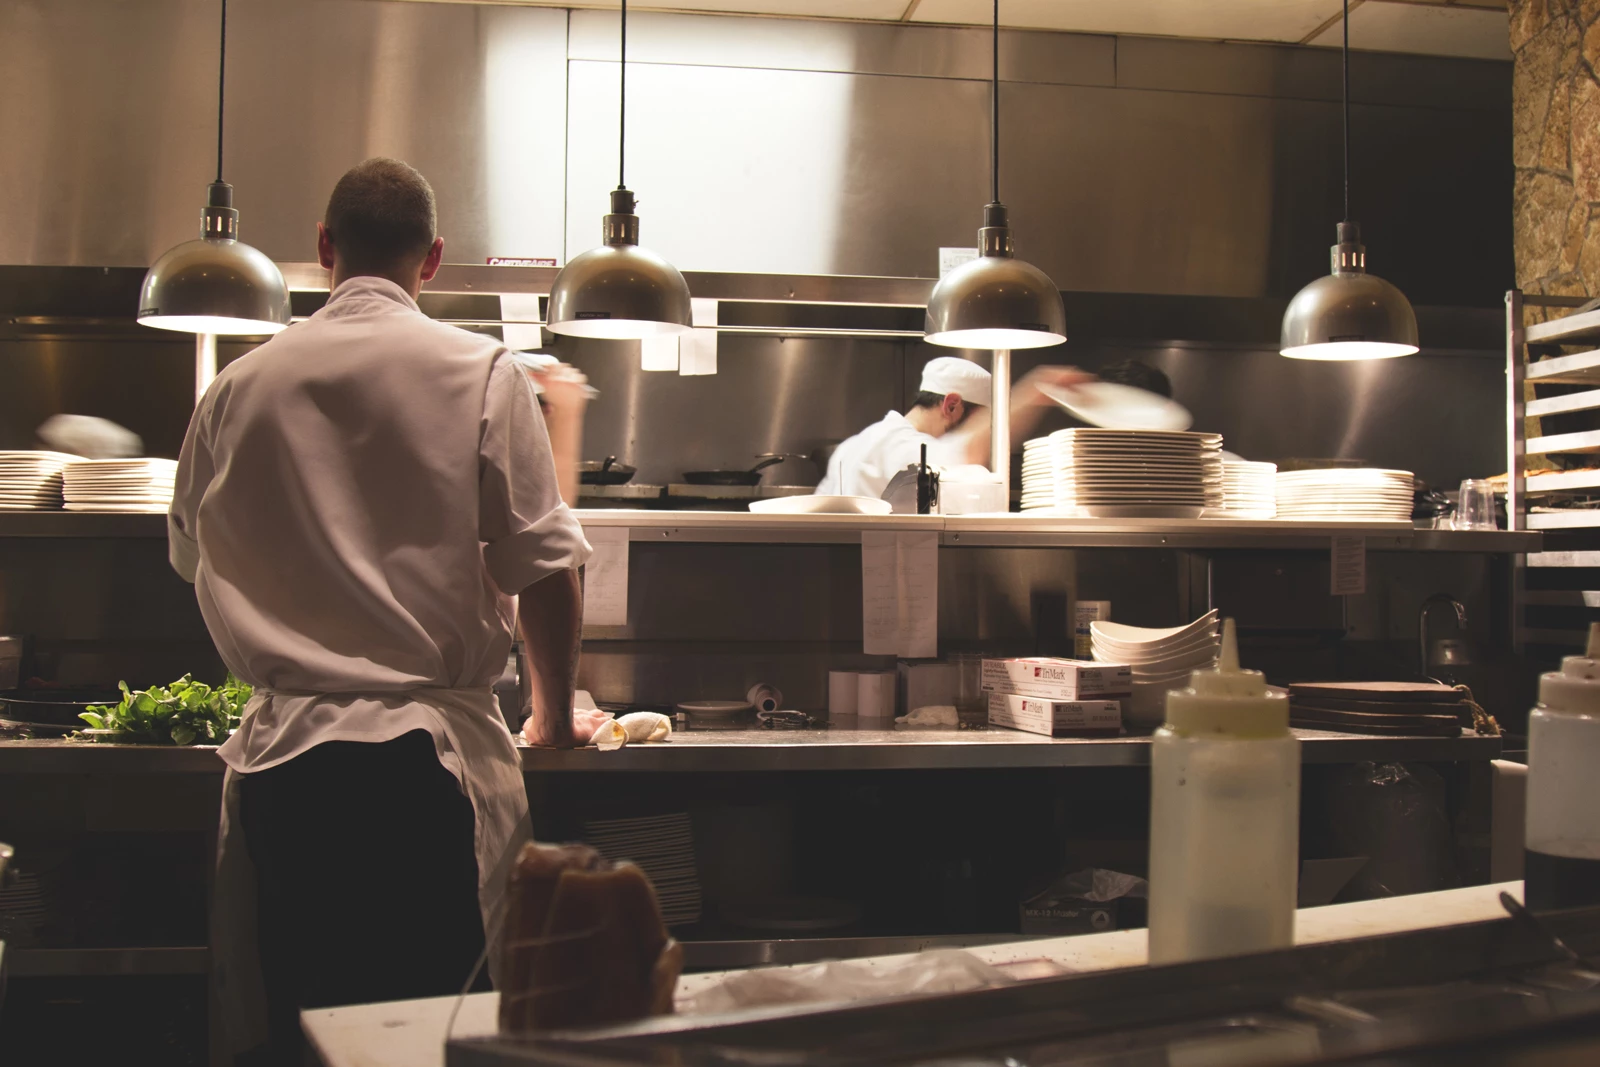 A busy kitchen during service